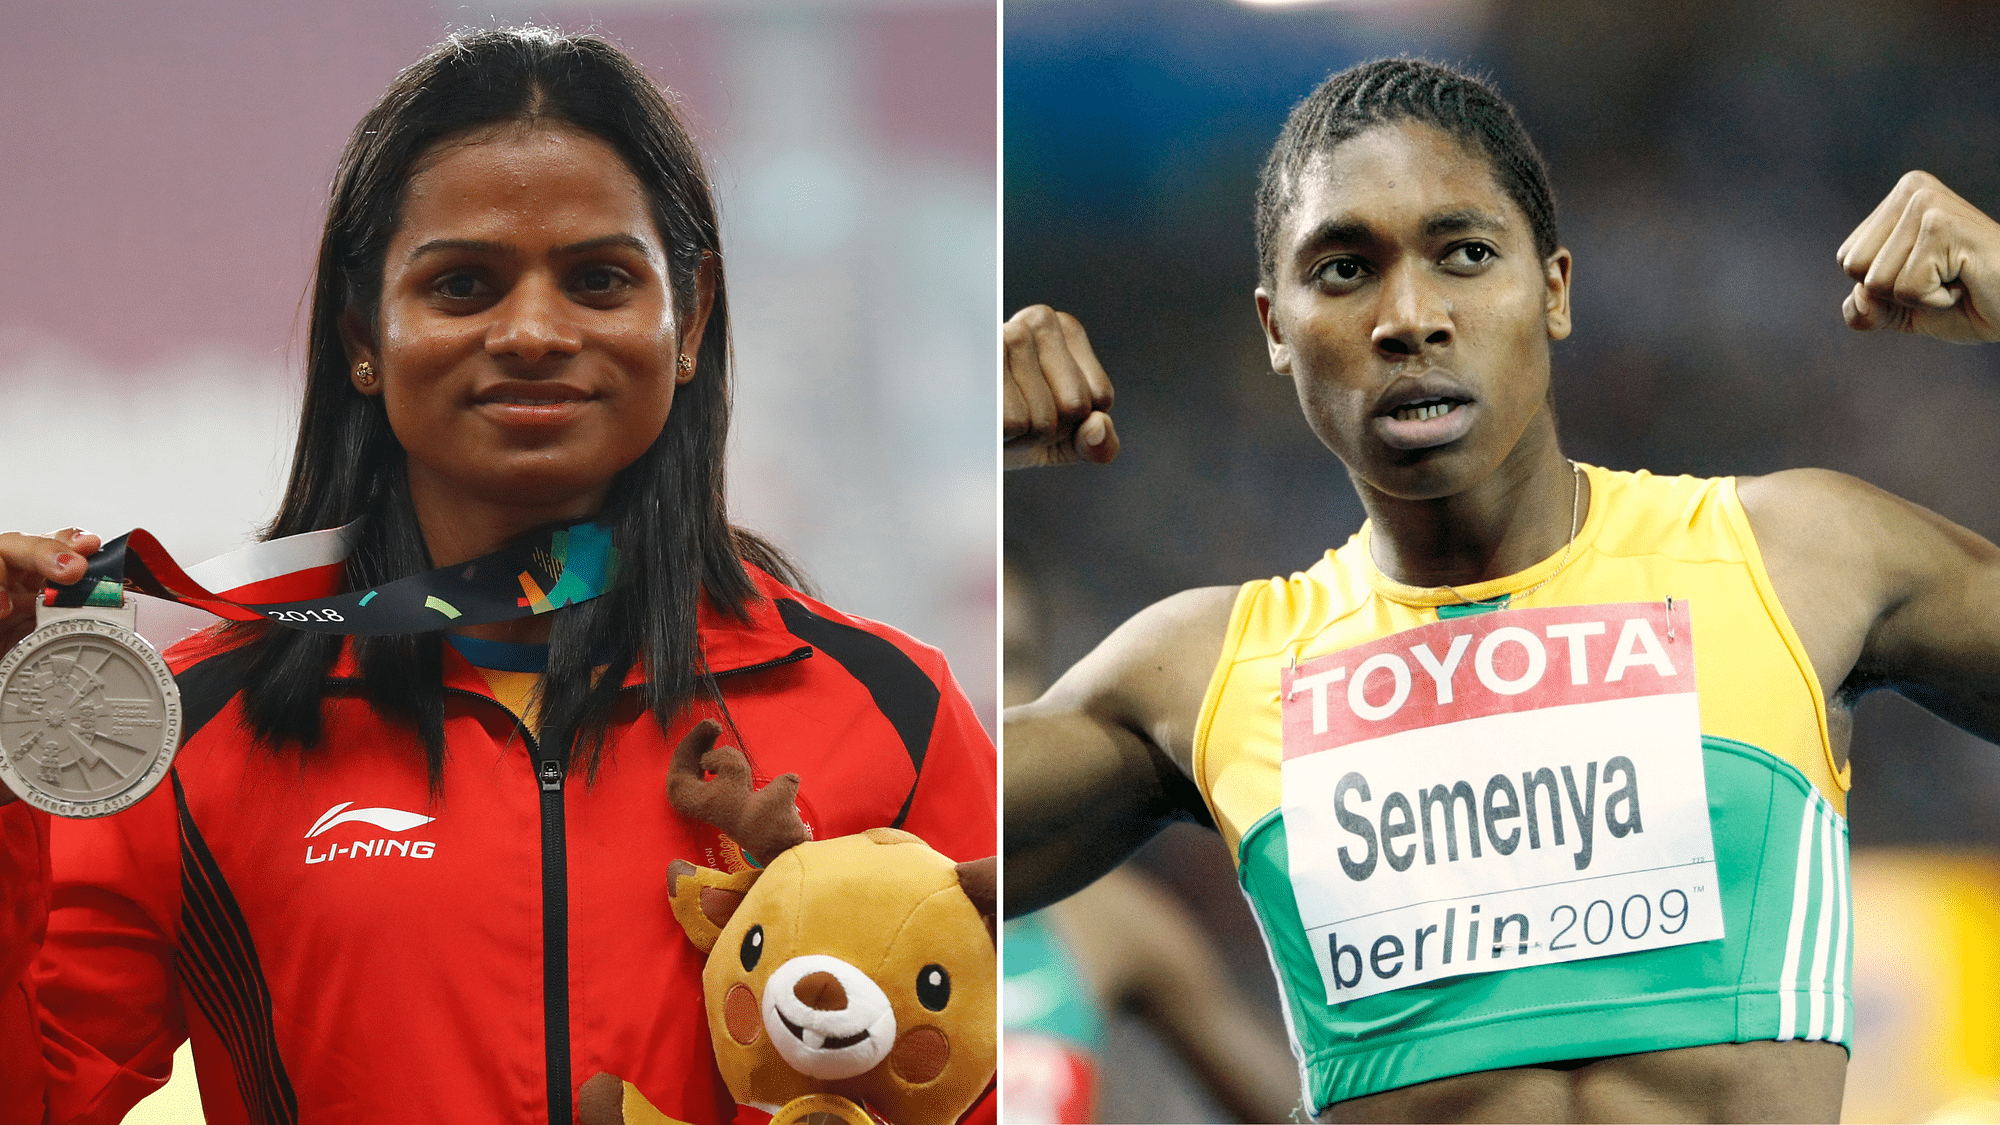 Dutee and Semenya have both struggled with IAAF rules in the past due to high testosterone levels.